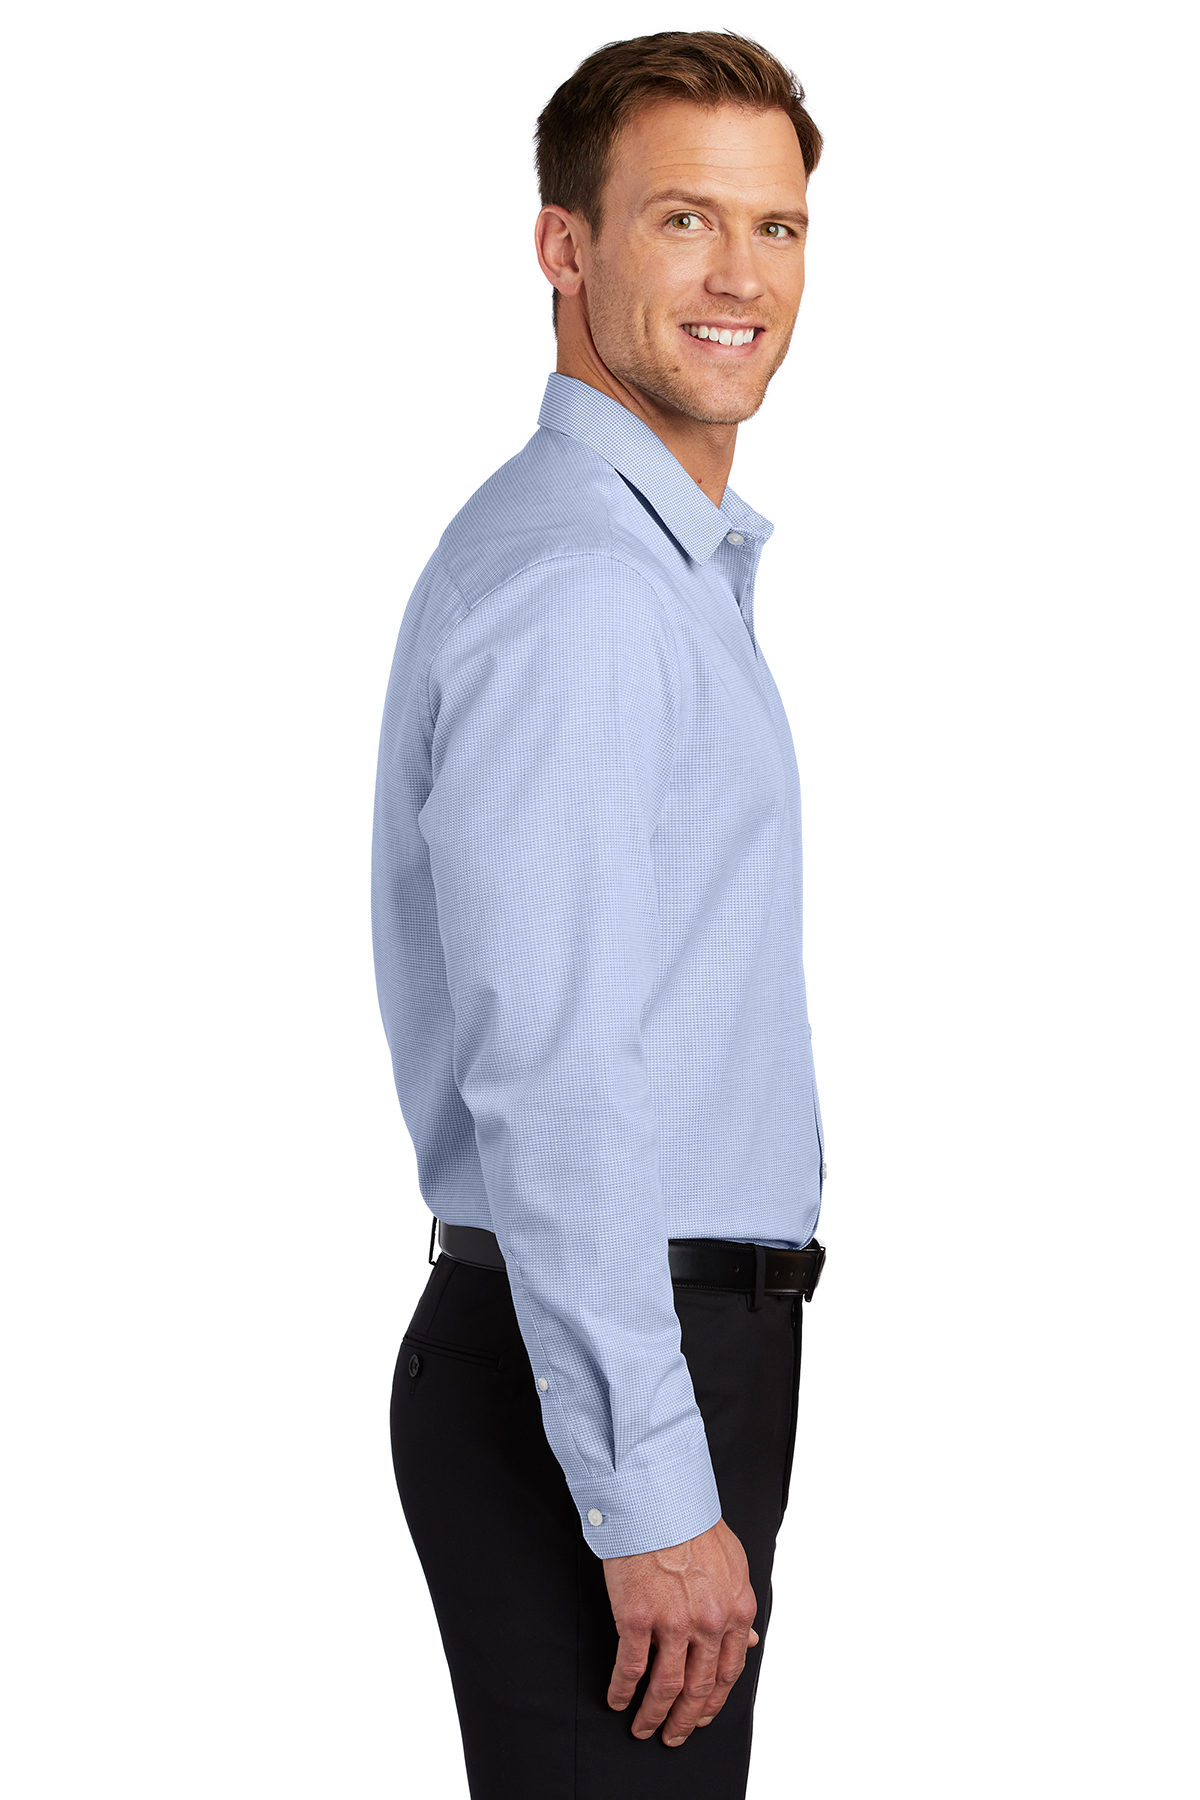 Port Authority Pincheck Easy Care Shirt | Product | Port Authority